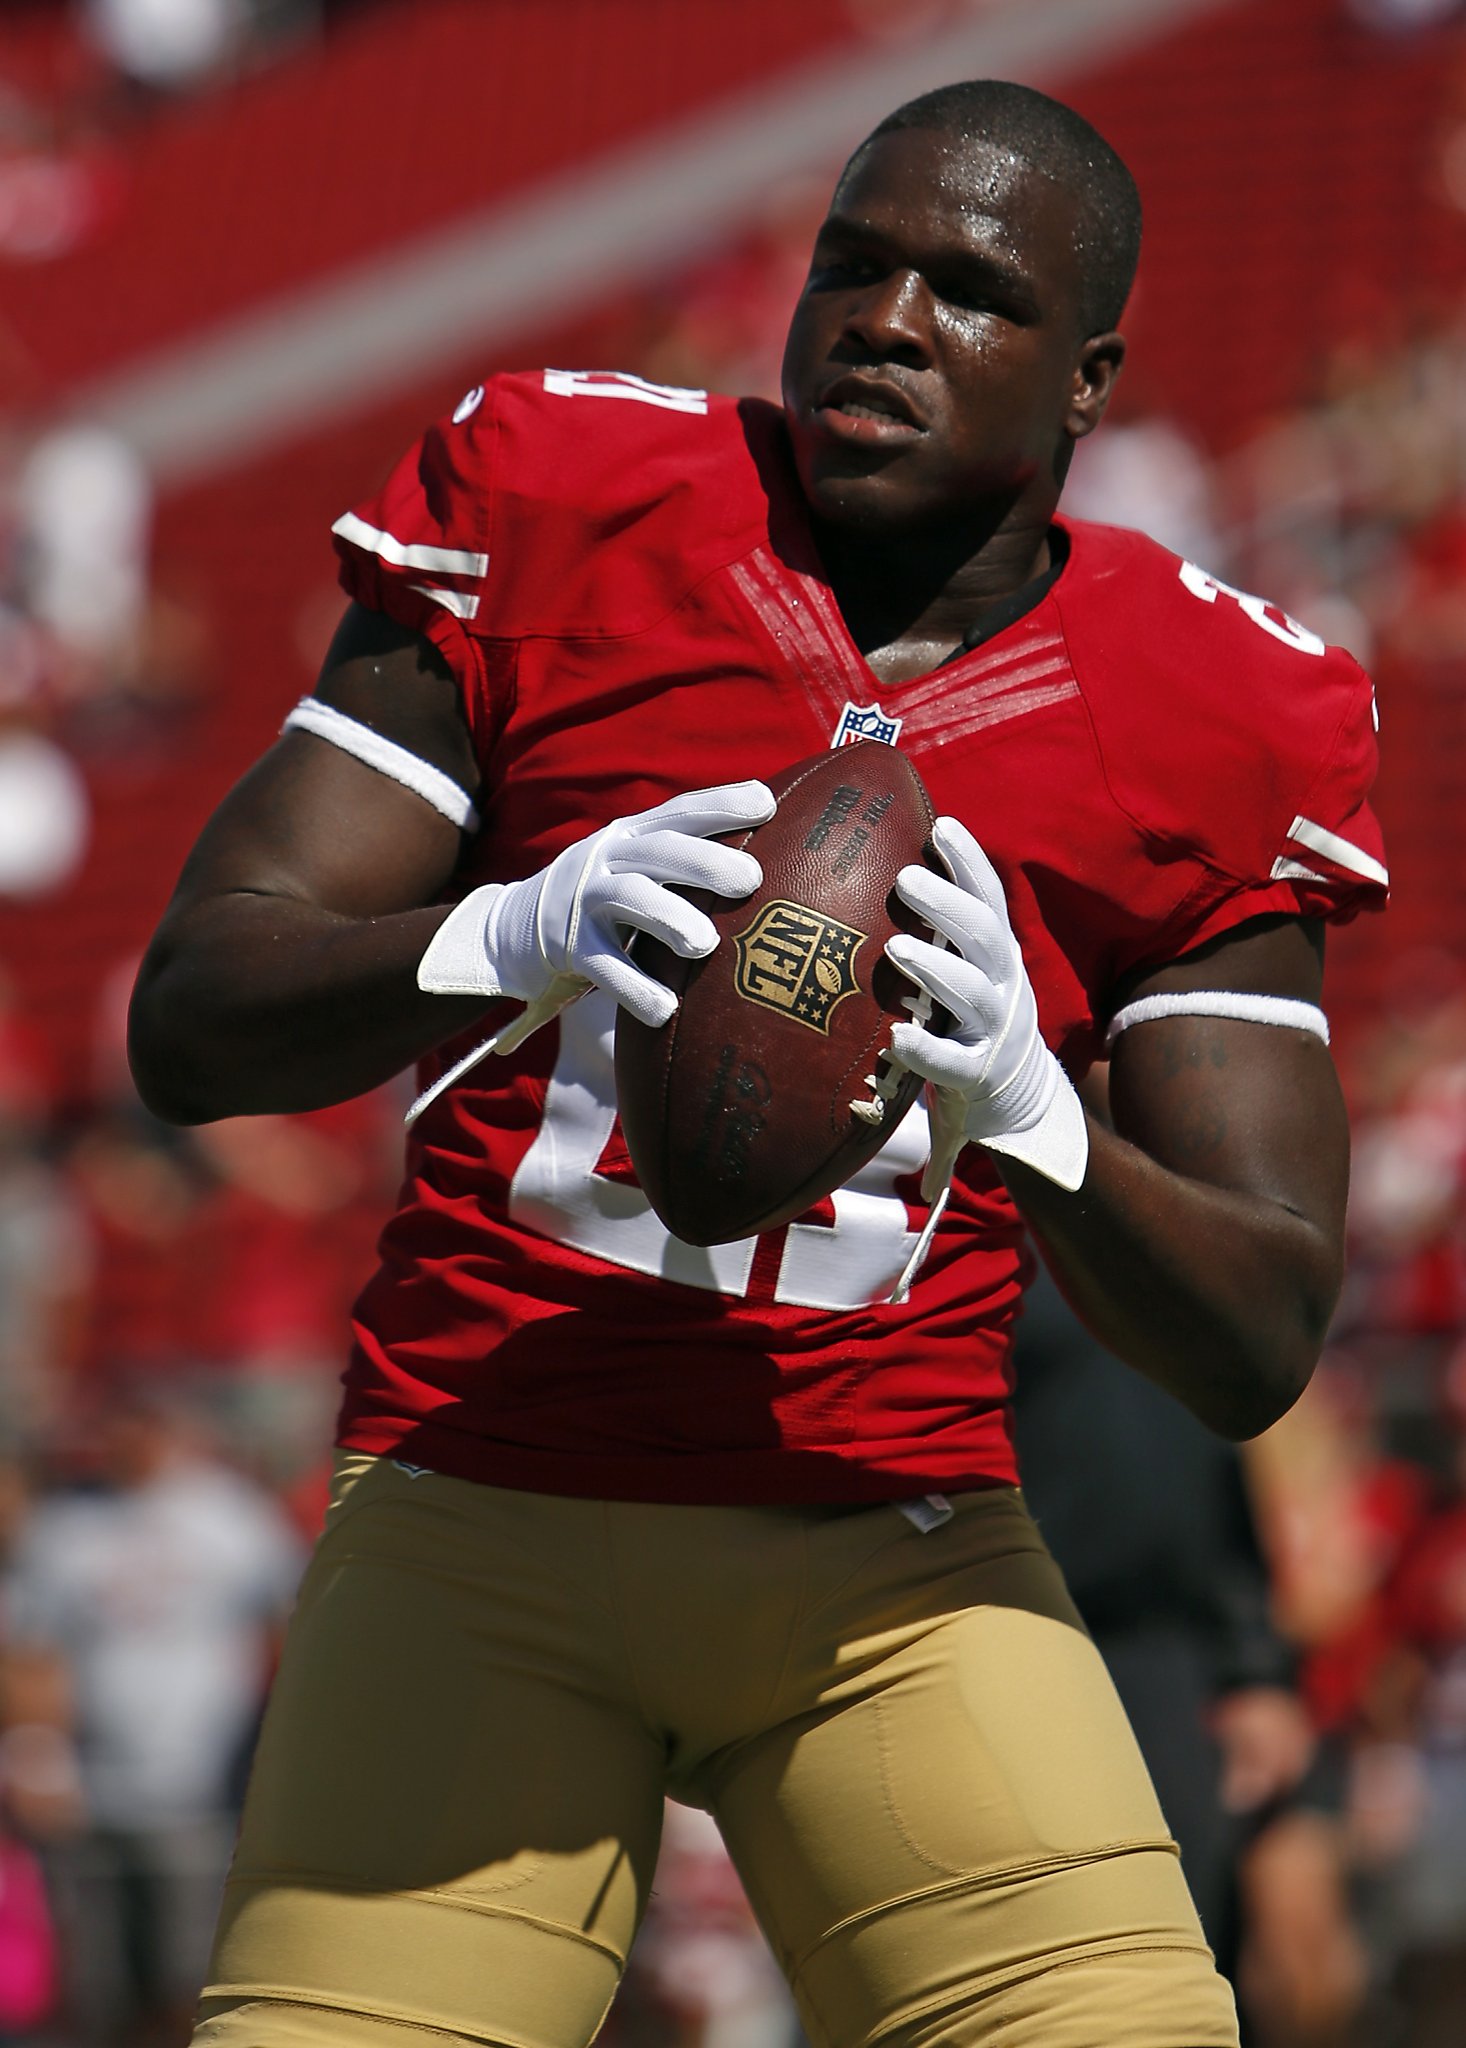 Report: Frank Gore intends to sign with Eagles; receive $7.5 million guaranteed - SFGate